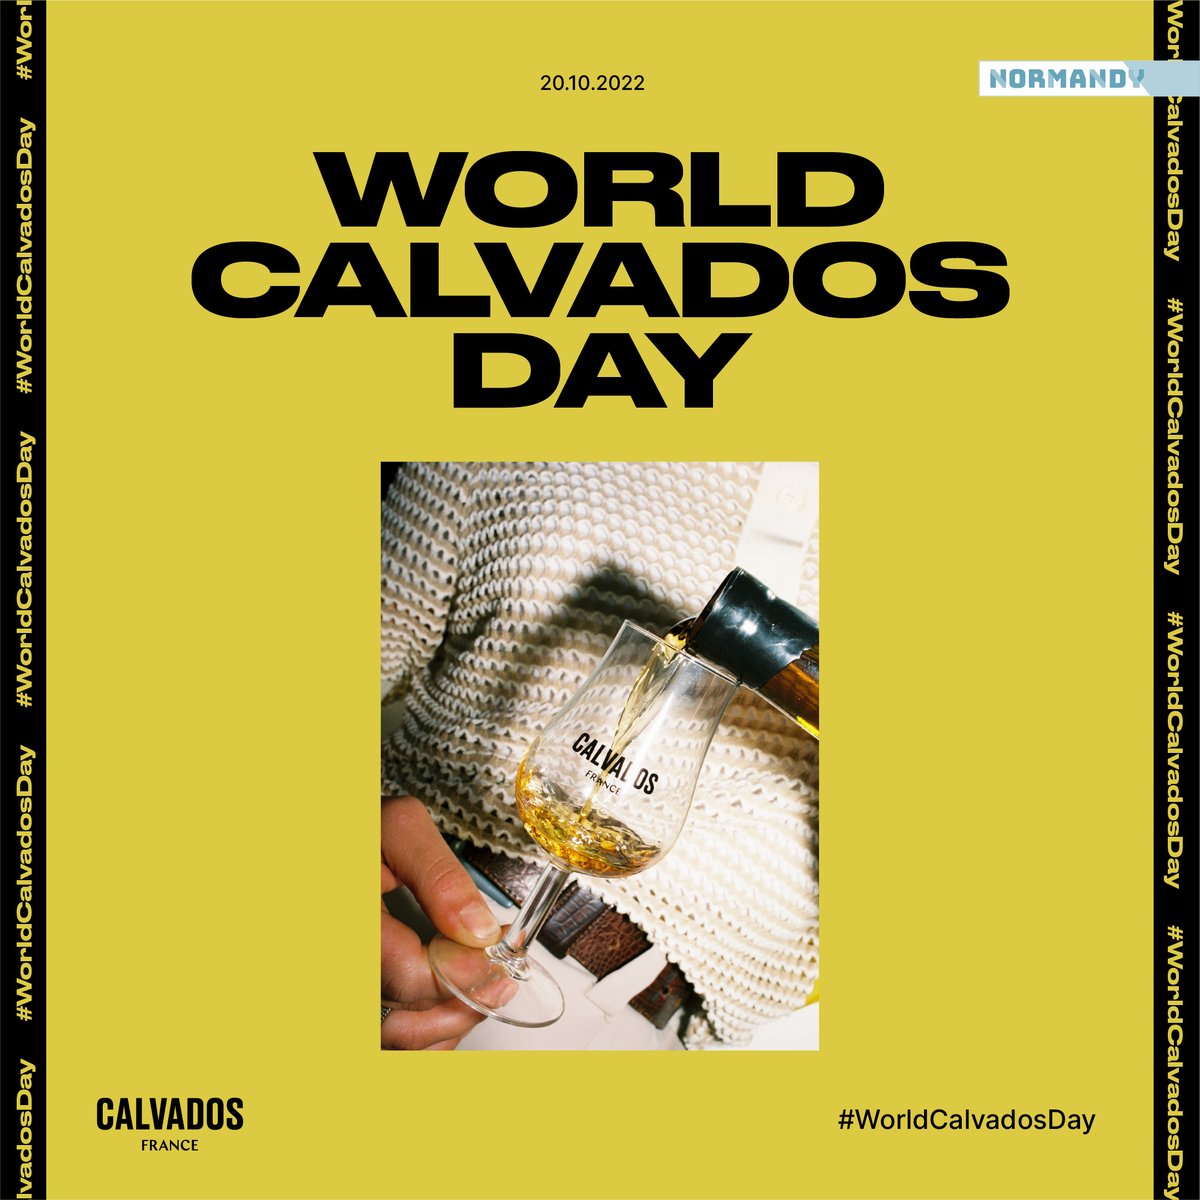 Today is the day! Calvados distilleries, alongside the Normandy's ambassadors clubs, are mobilising to celebrate #WorldCalvadosDay all over the world.